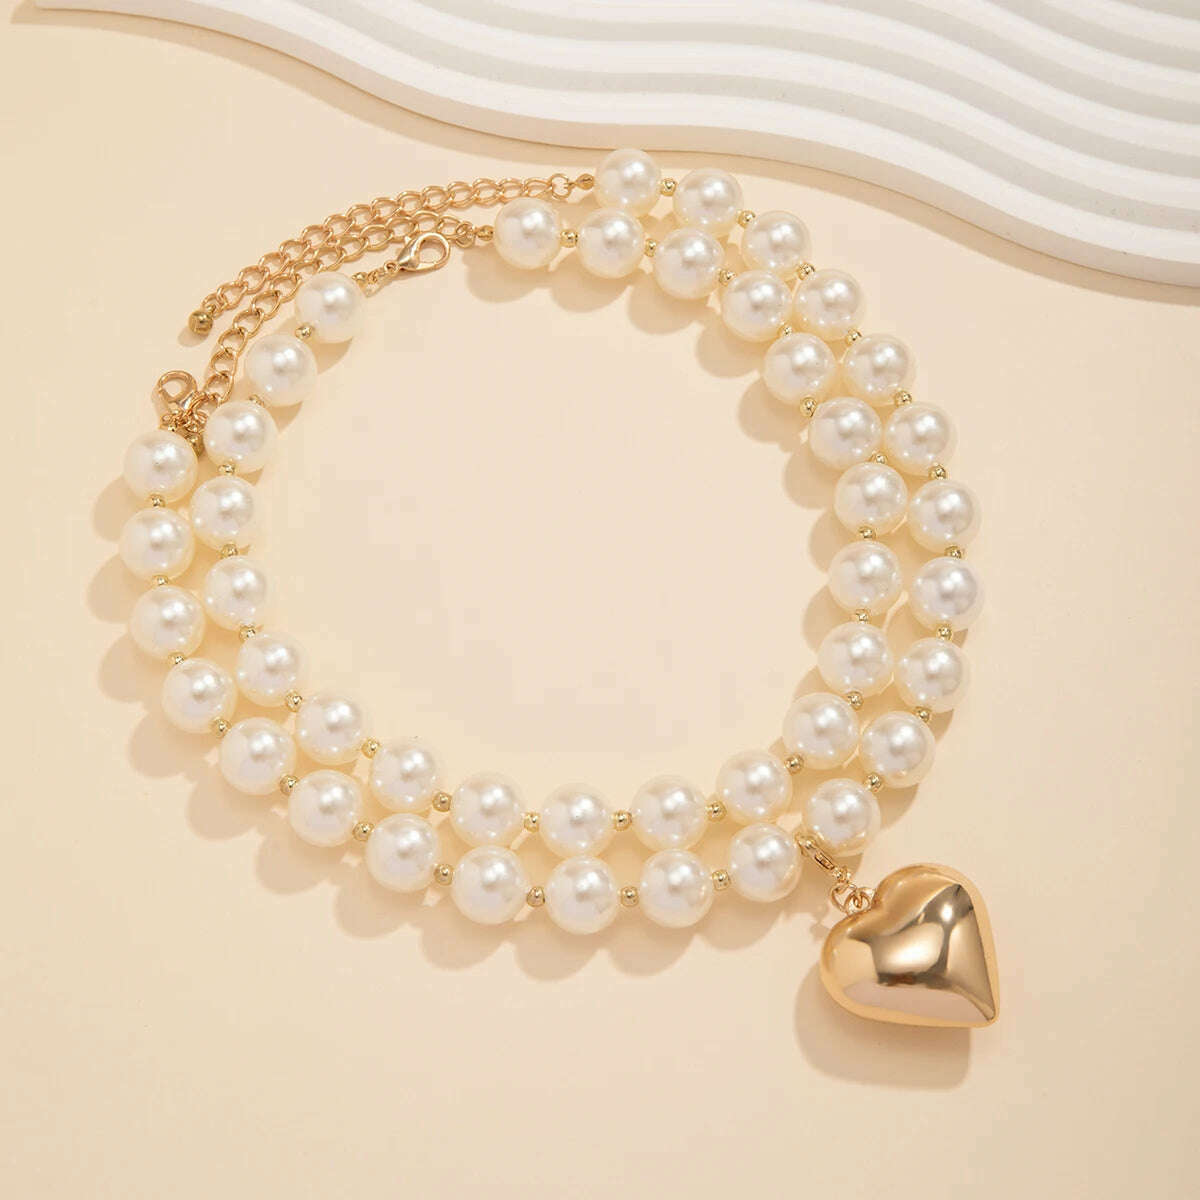 KIMLUD, Lacteo Exaggerated Imitation Pearl Beads Necklace for Women CCB Big Heart Pendant Choker Jewelry On The Neck Collar Party Girls, KIMLUD Womens Clothes